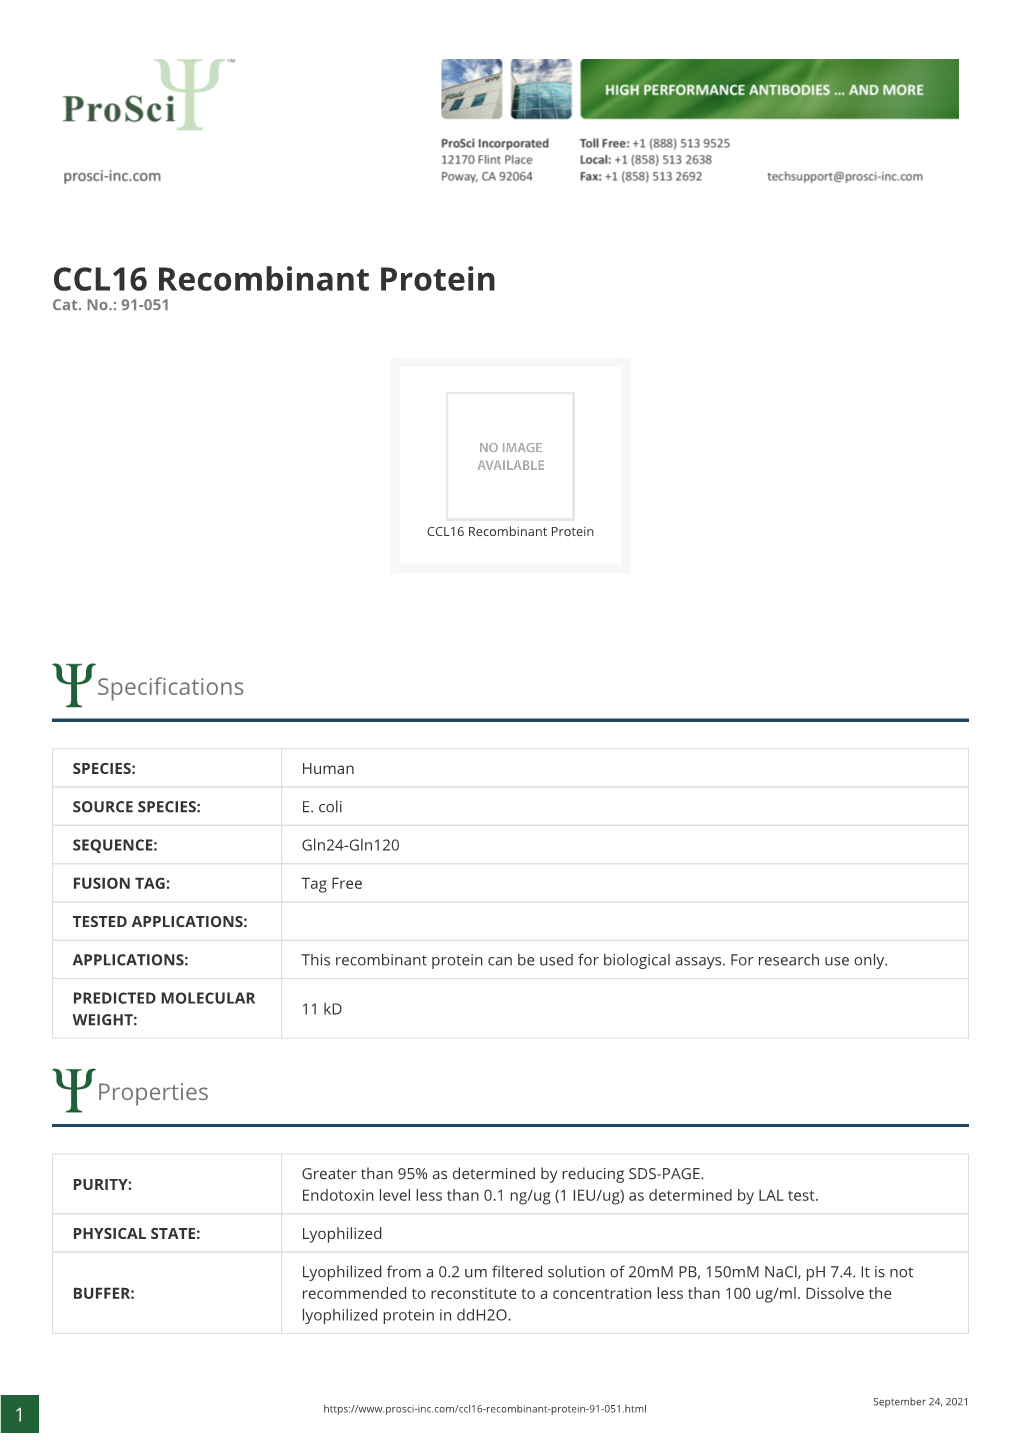 CCL16 Recombinant Protein Cat